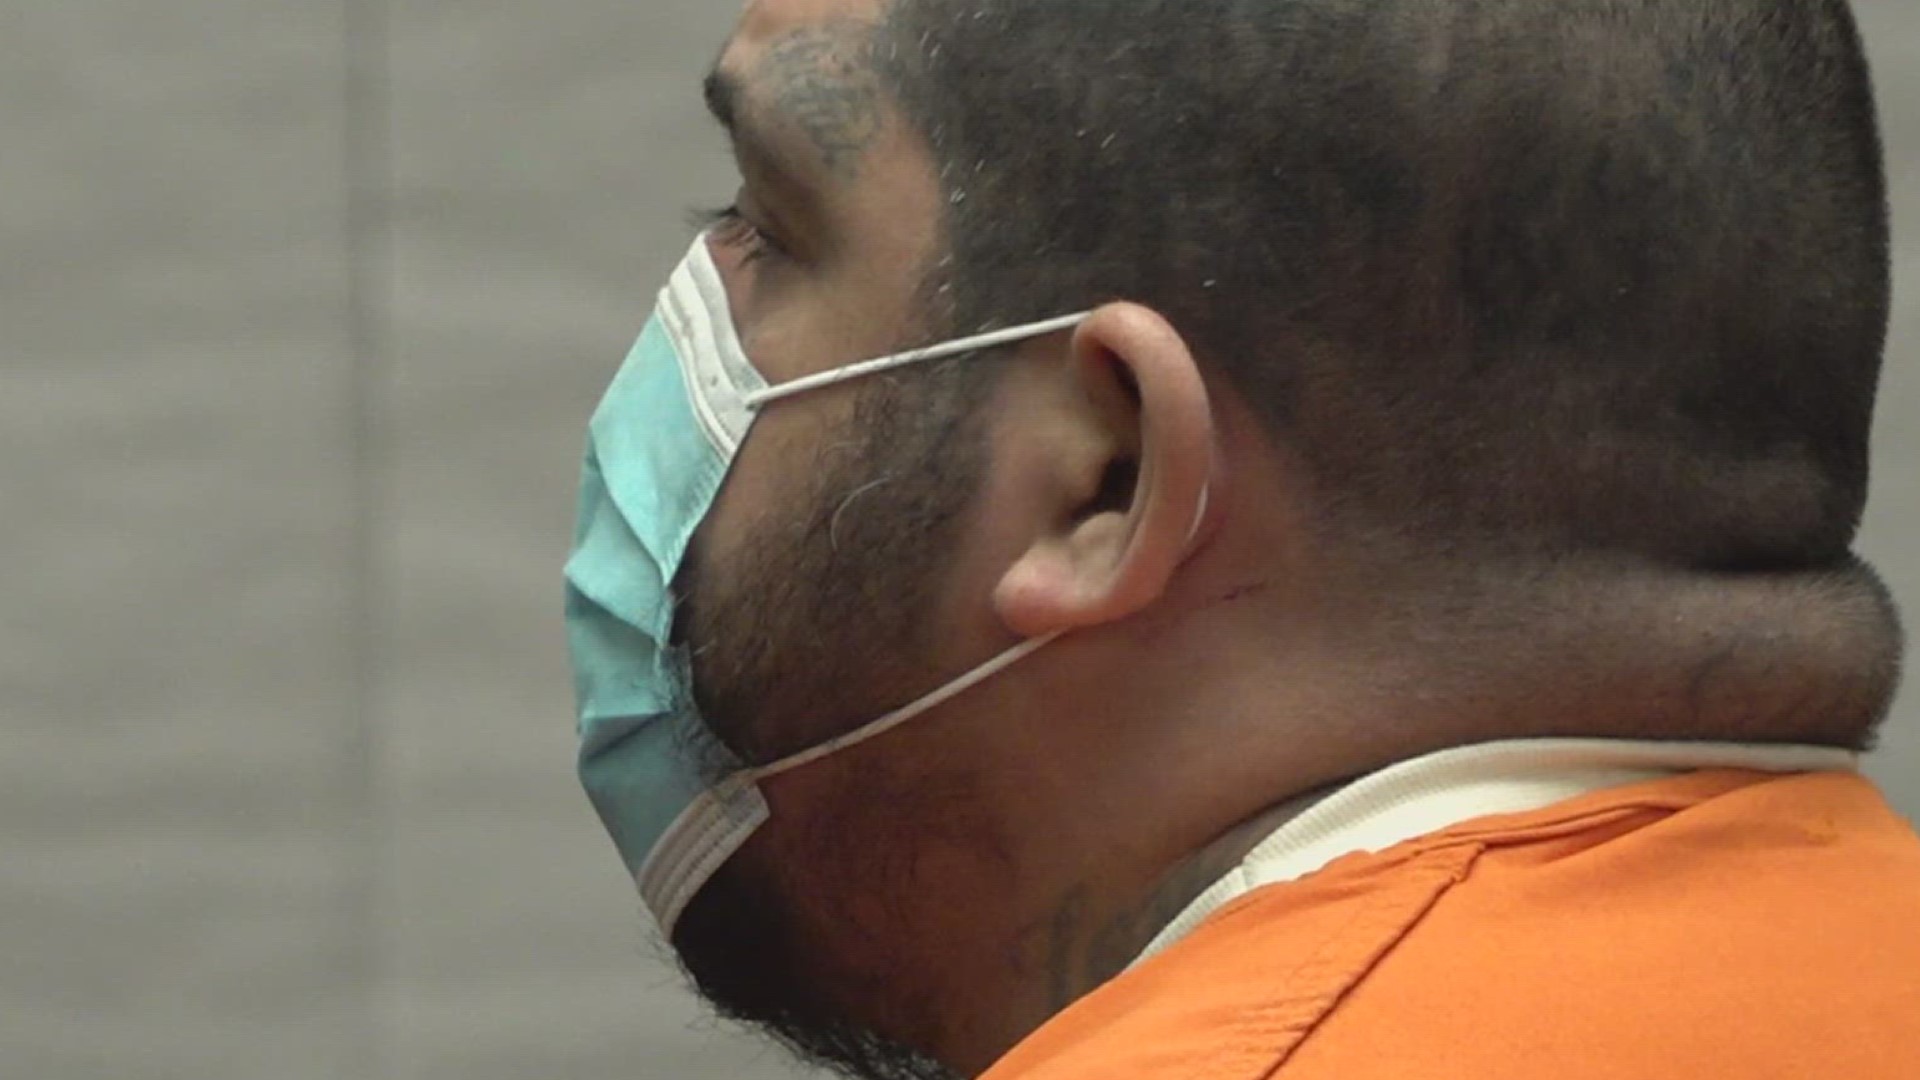 Lopez was found guilty and will serve 25 years in a Texas prison for fatally shooting a man at a Southside gas station in 2022.